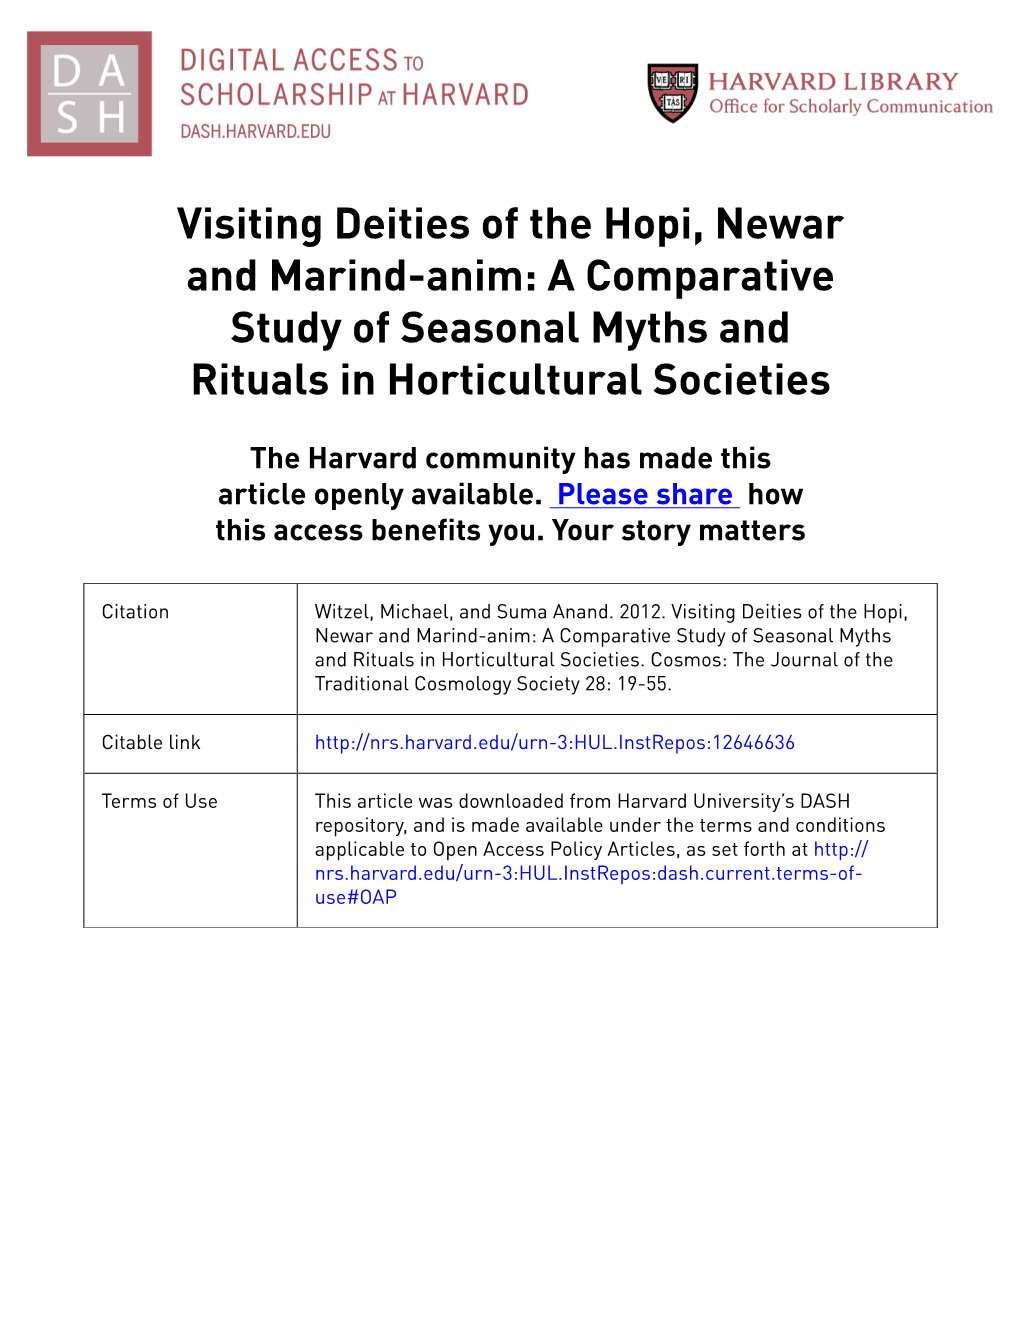 Visiting Deities of the Hopi, Newar and Marind-Anim: a Comparative Study of Seasonal Myths and Rituals in Horticultural Societies